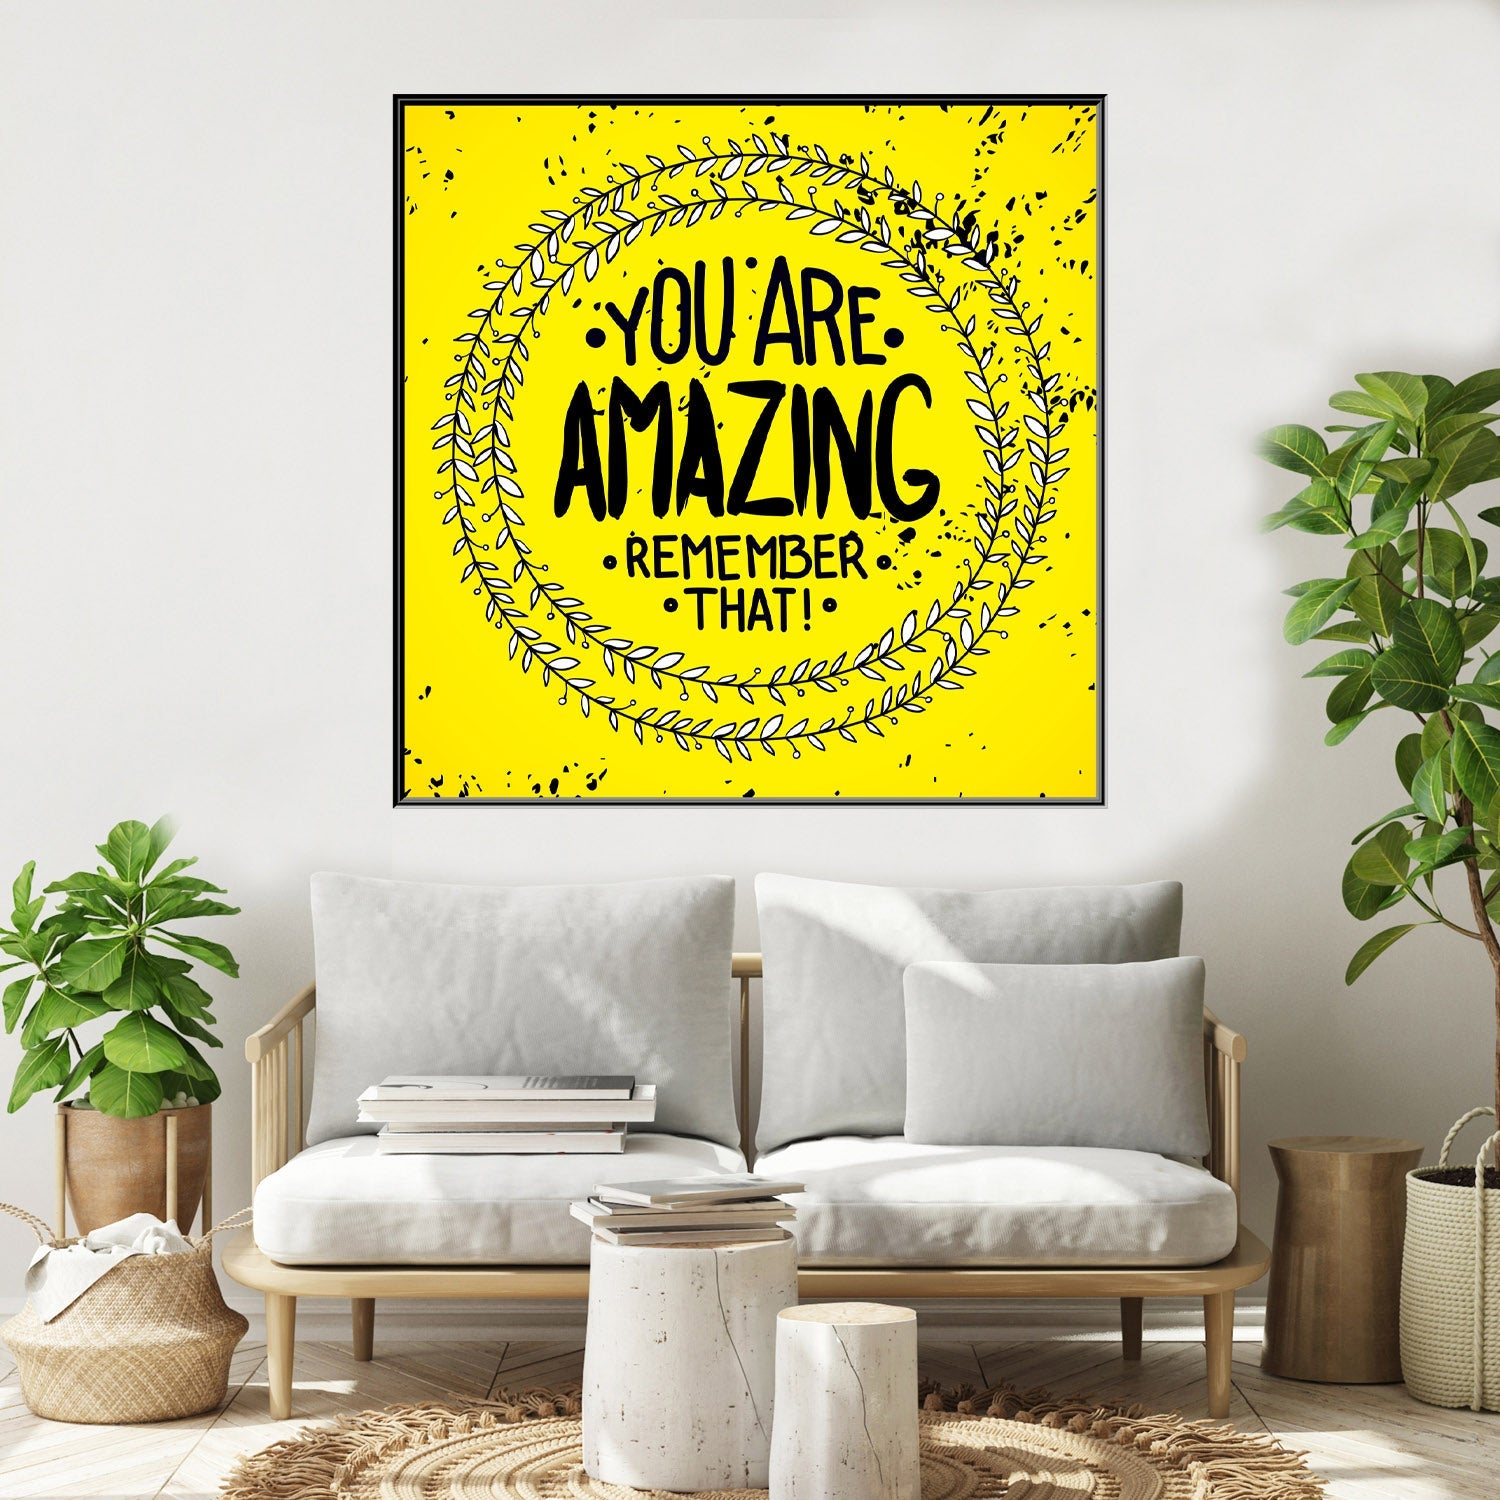 https://cdn.shopify.com/s/files/1/0387/9986/8044/products/YouAreAmazingCanvasArtprintStretched-3.jpg